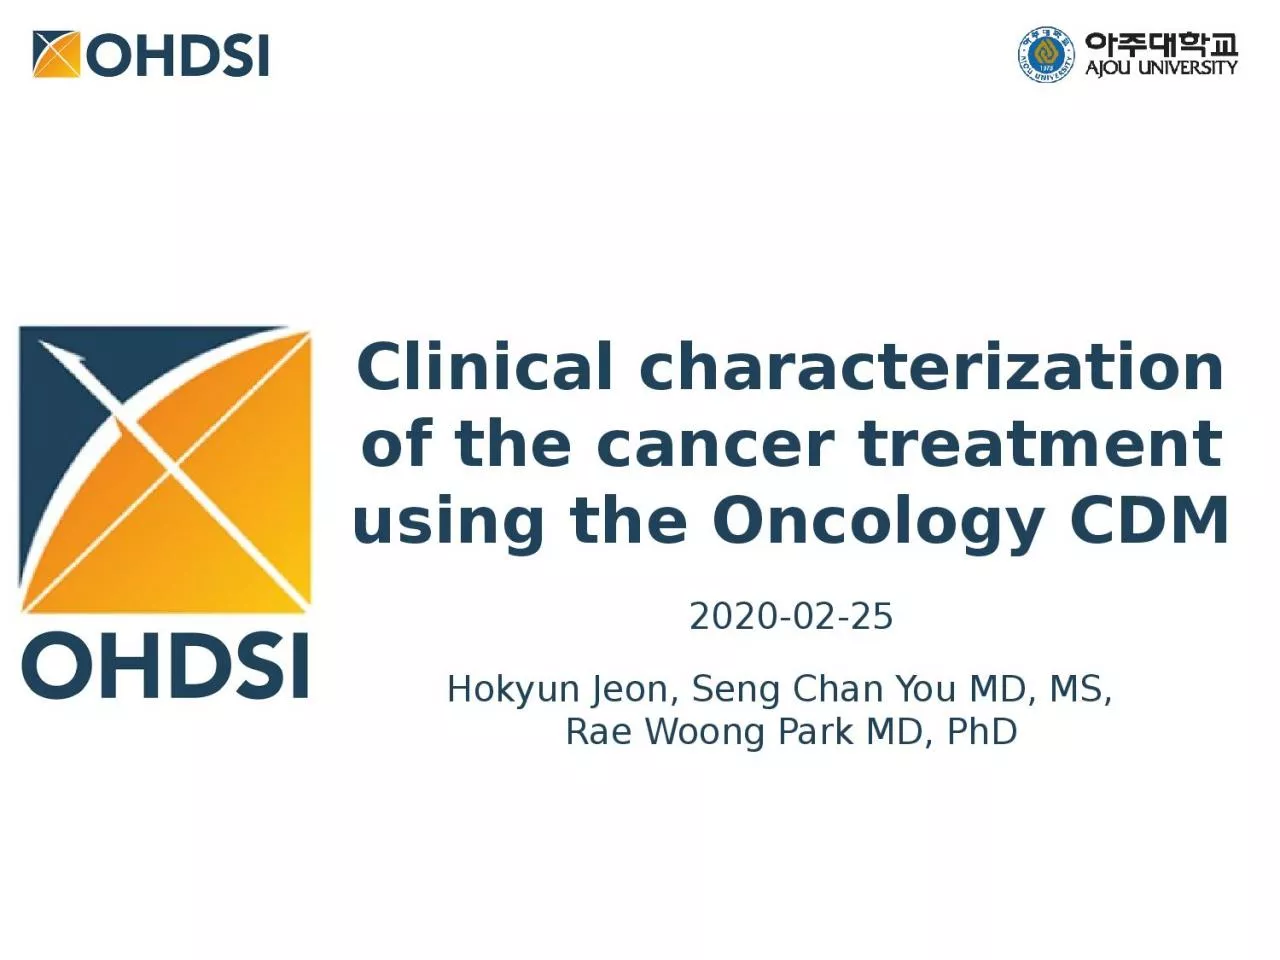 Clinical characterization of the cancer treatment using the Oncology CDM